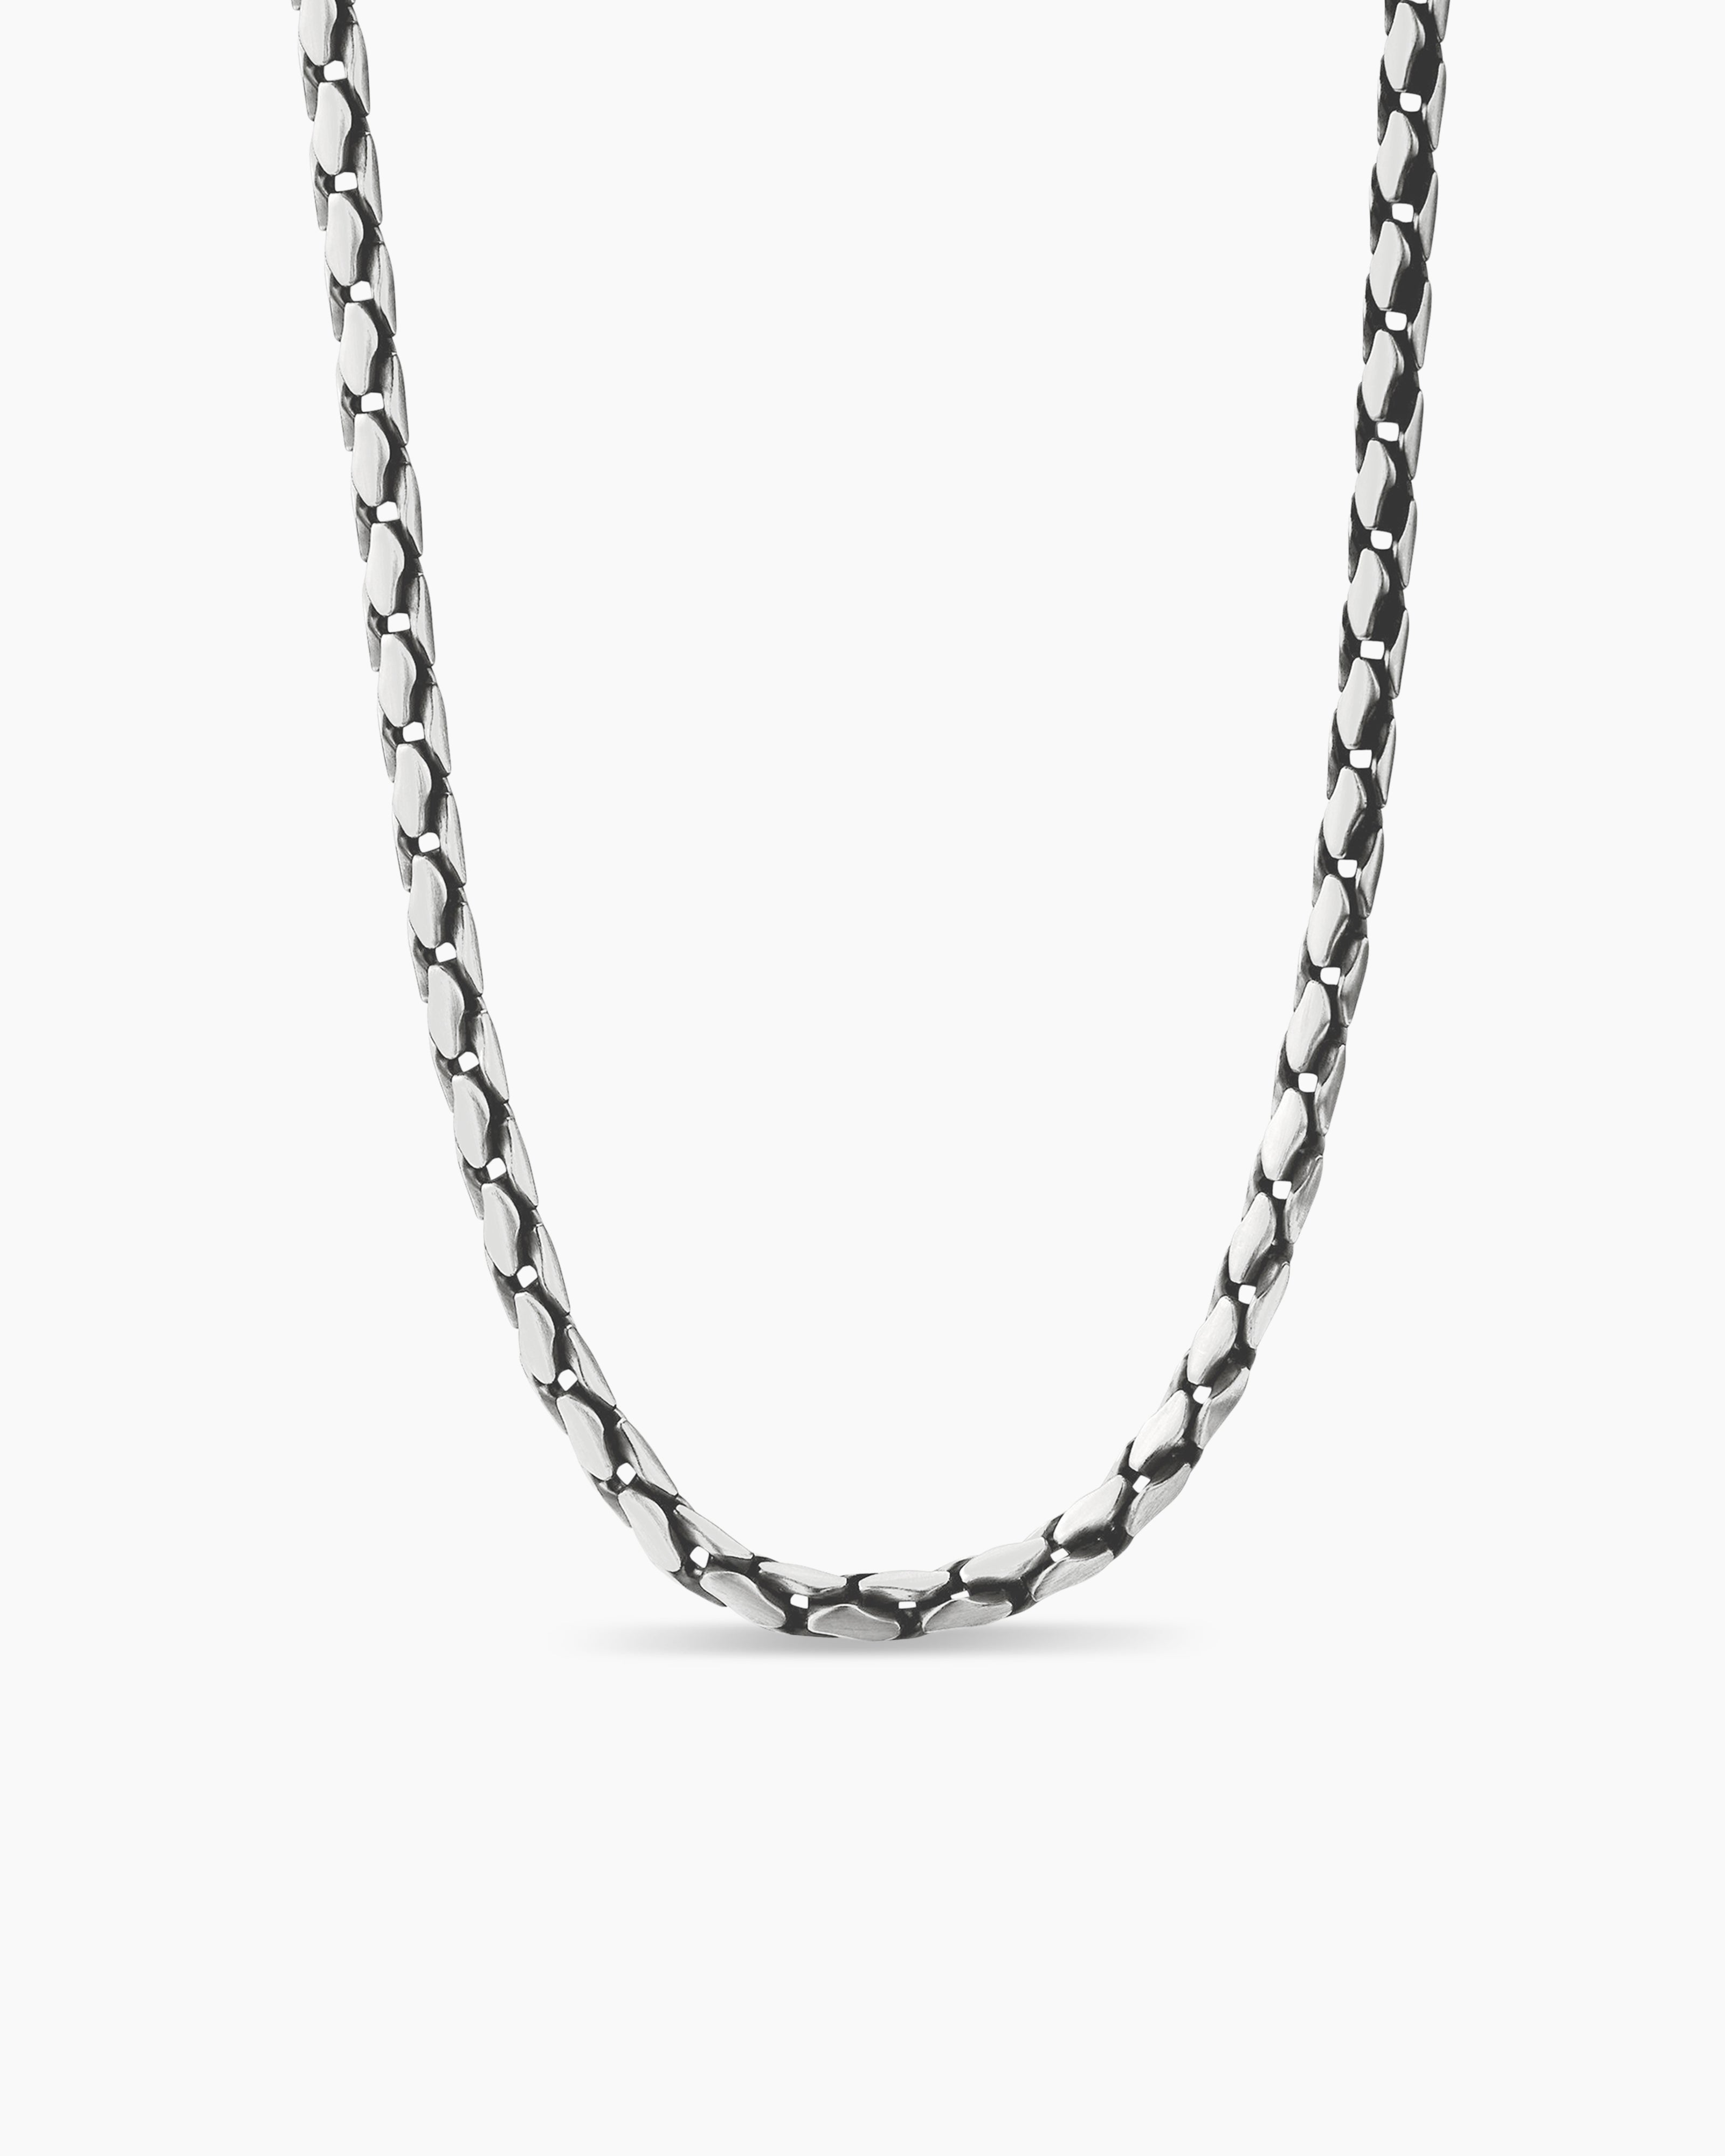 David Yurman Fluted Chain Necklace in Sterling Silver, 5mm Men's Size 22 IN